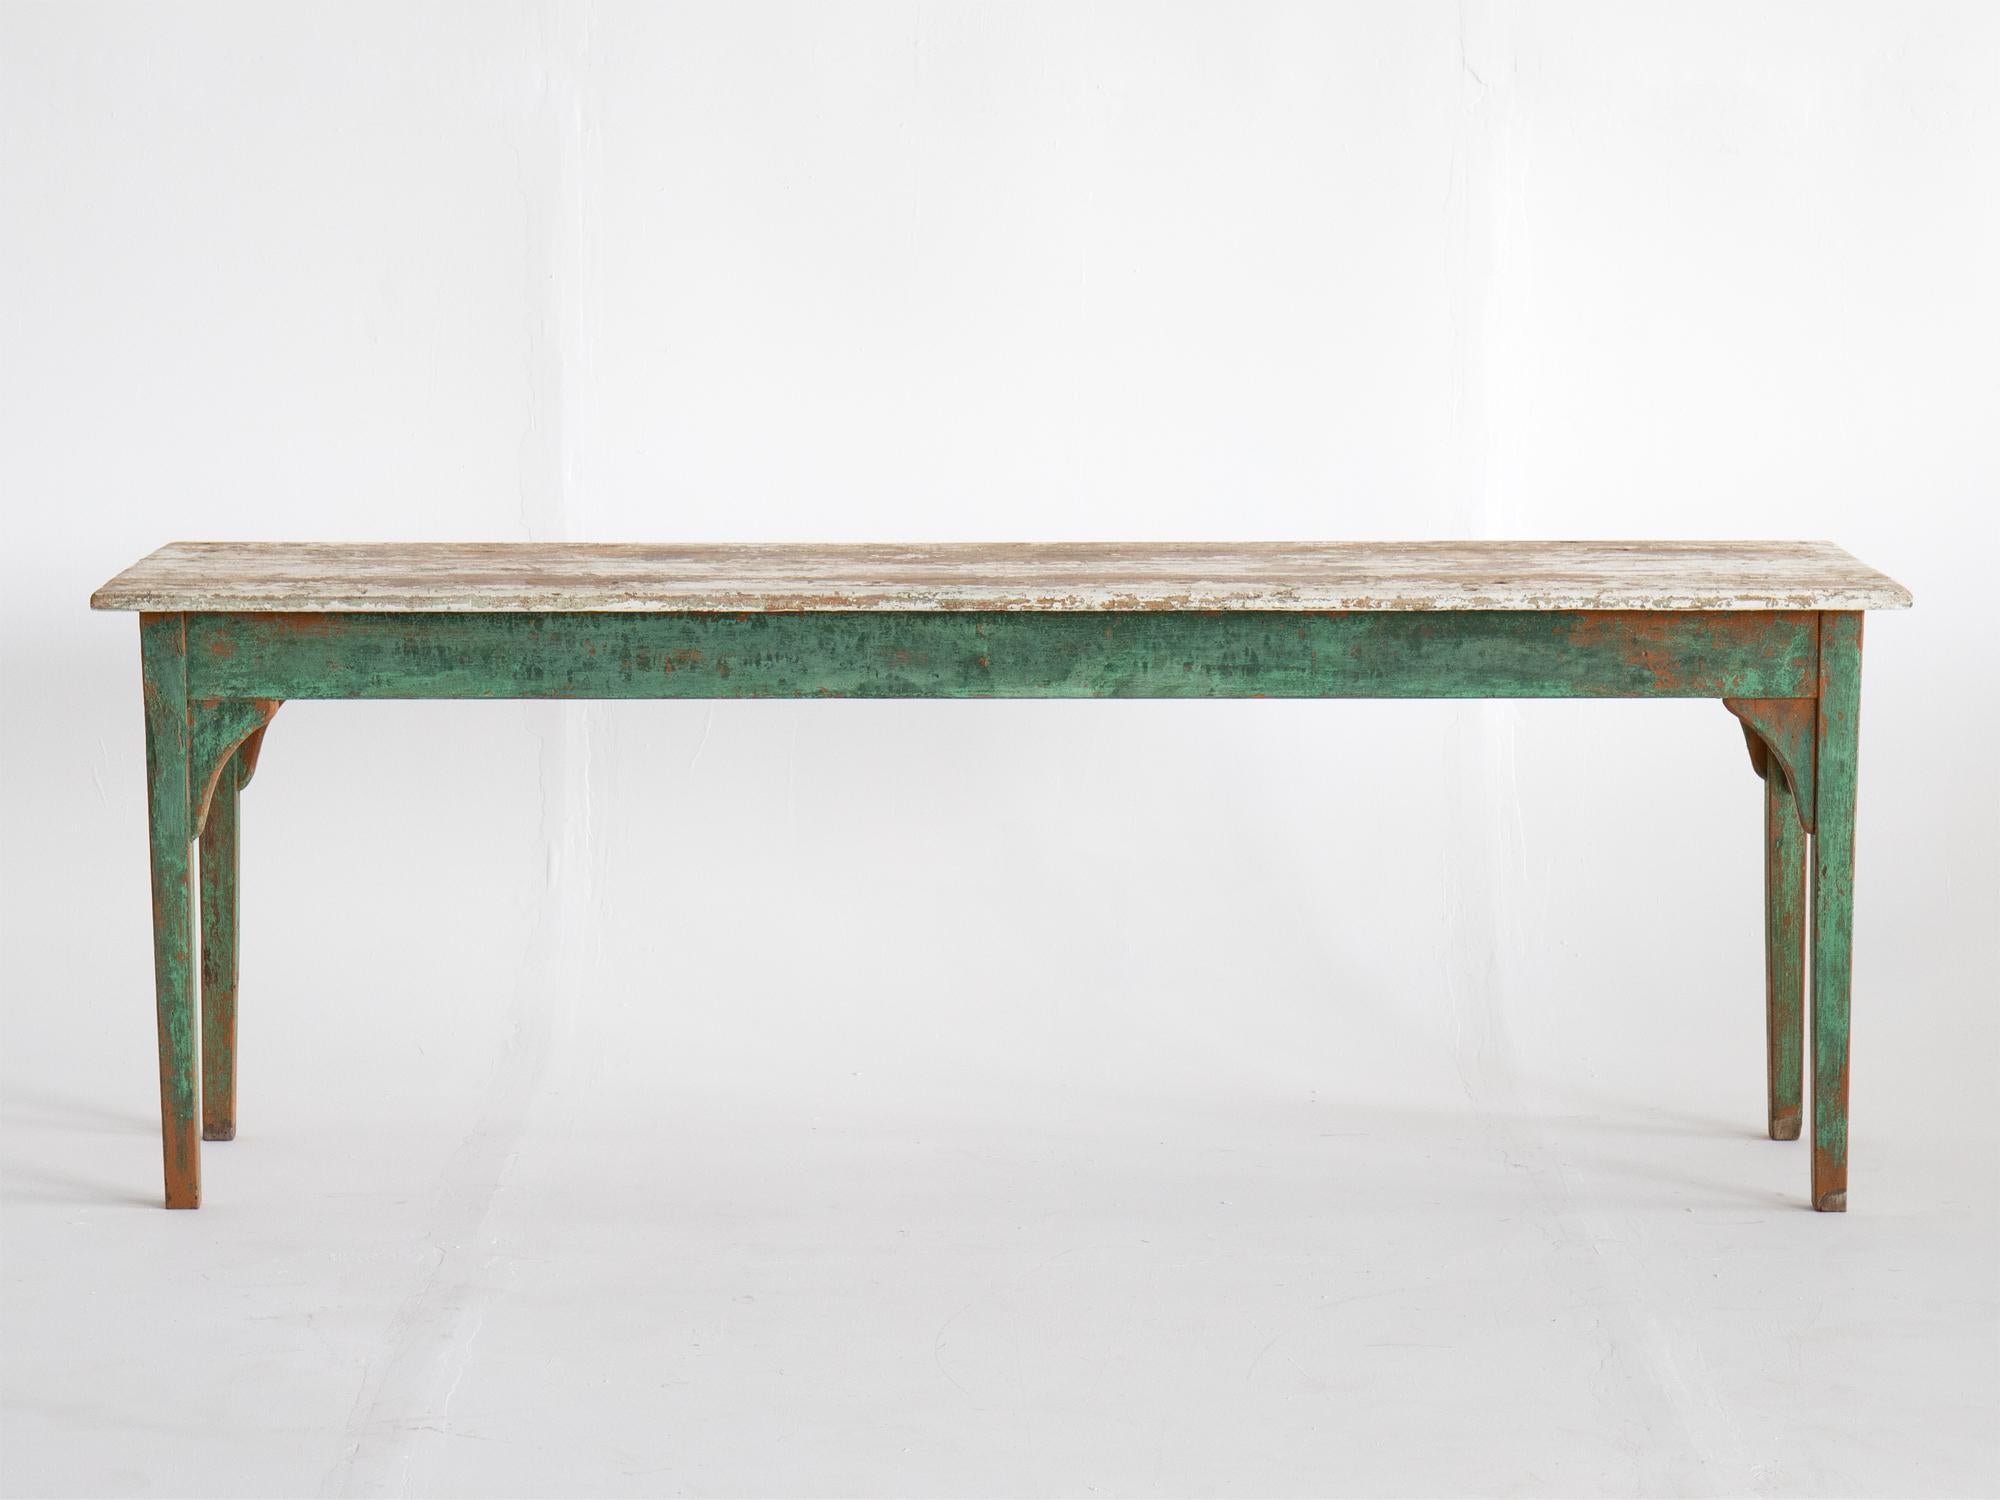 A provincial painted pine table. Swedish, 19th century. The plank-formation top raised on tapered legs. A versatile piece - narrow enough to use up against a wall as a hall/console table or may also be used in the centre of a room.